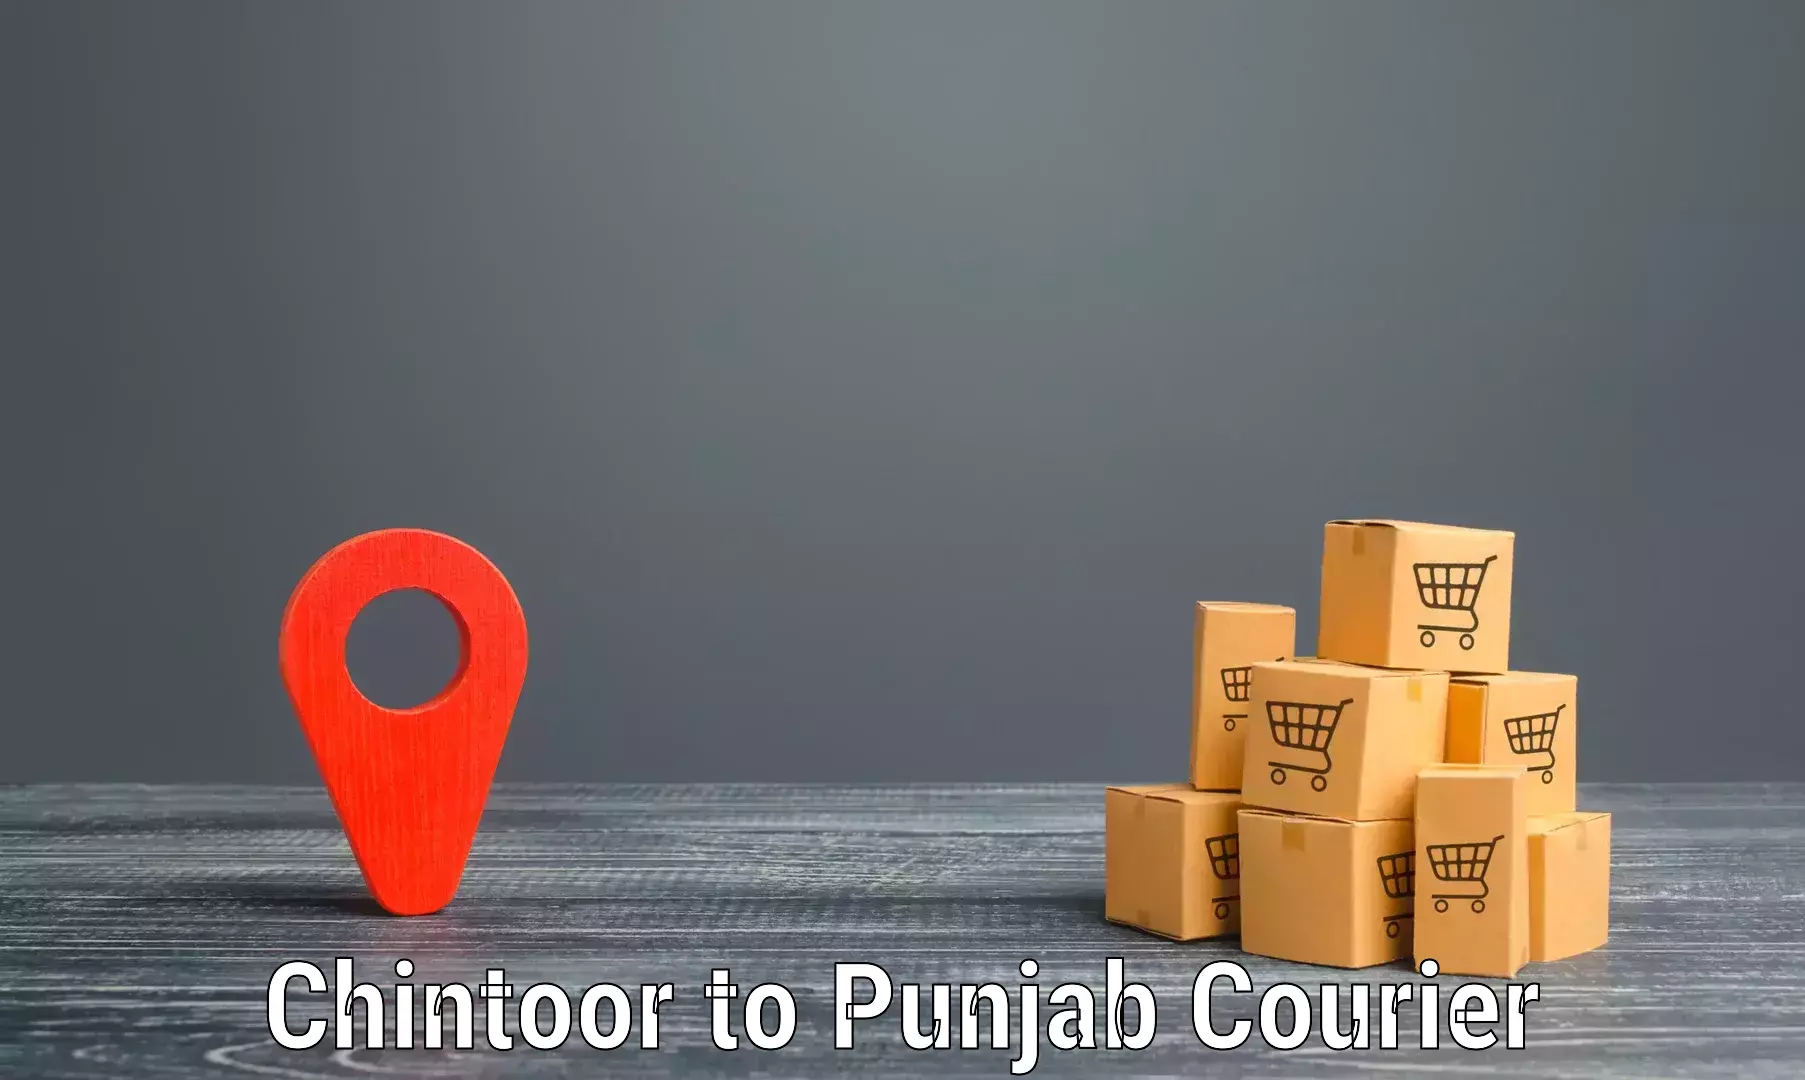 Business shipping needs Chintoor to Jhunir